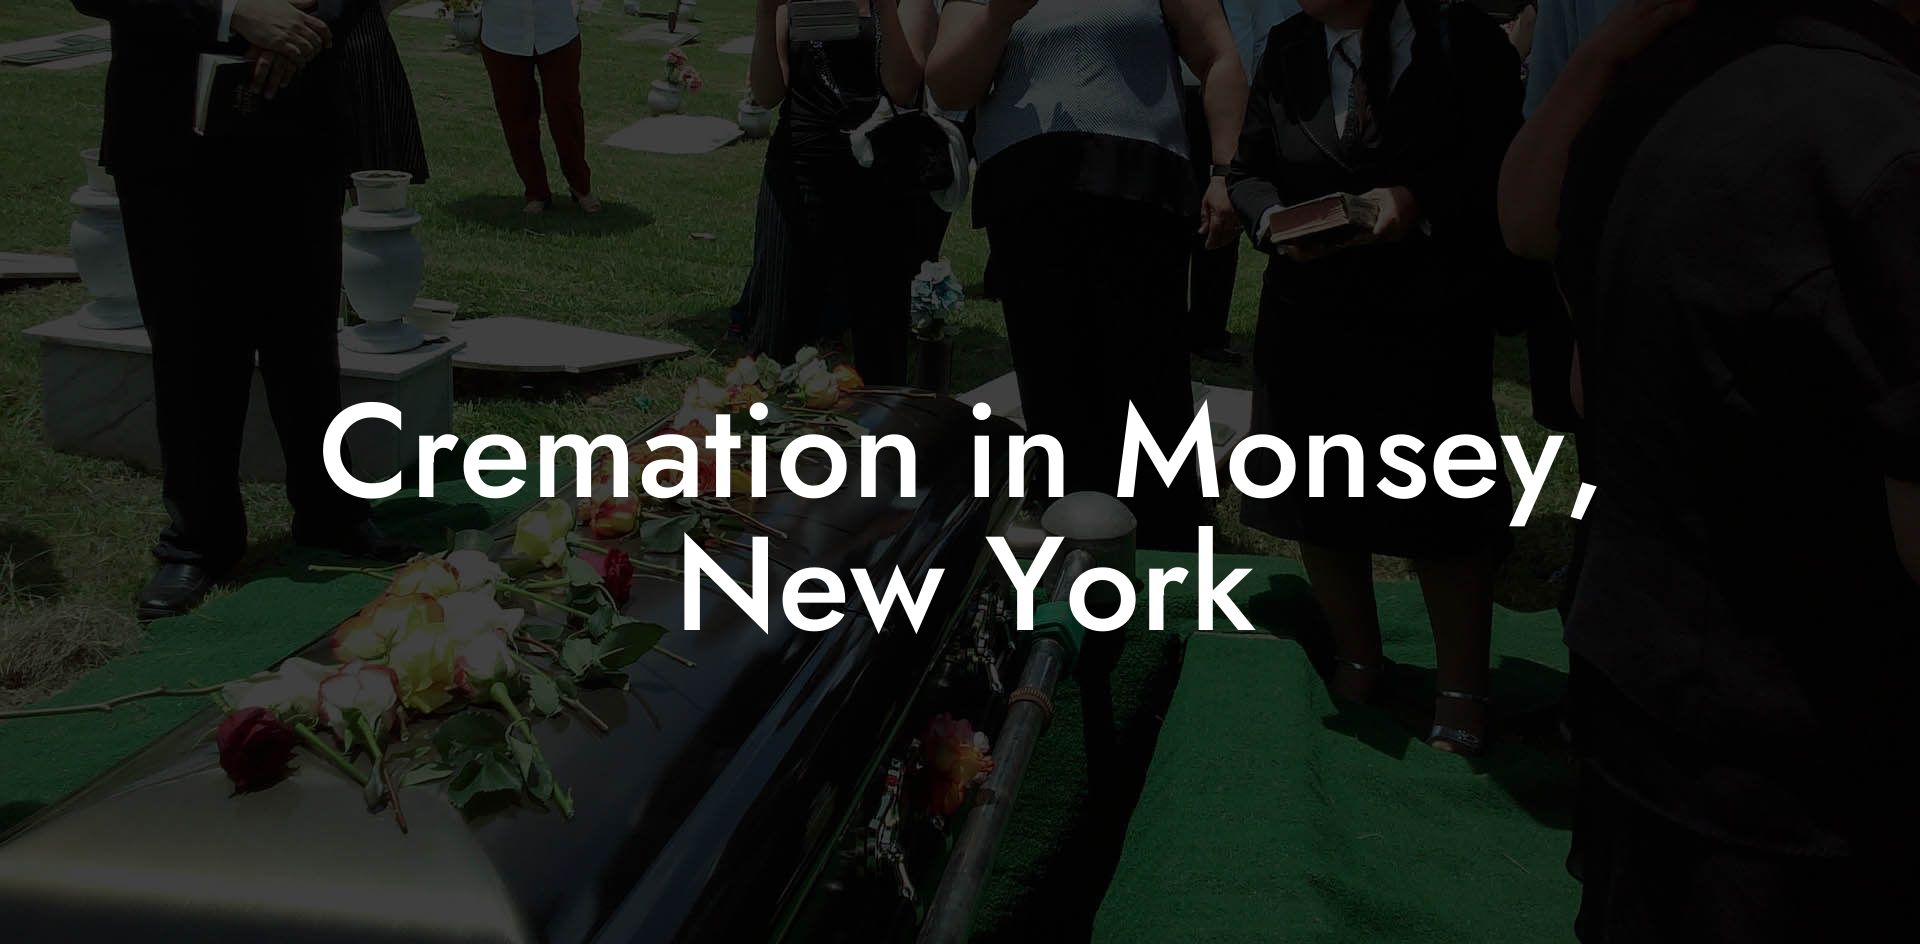 Cremation in Monsey, New York